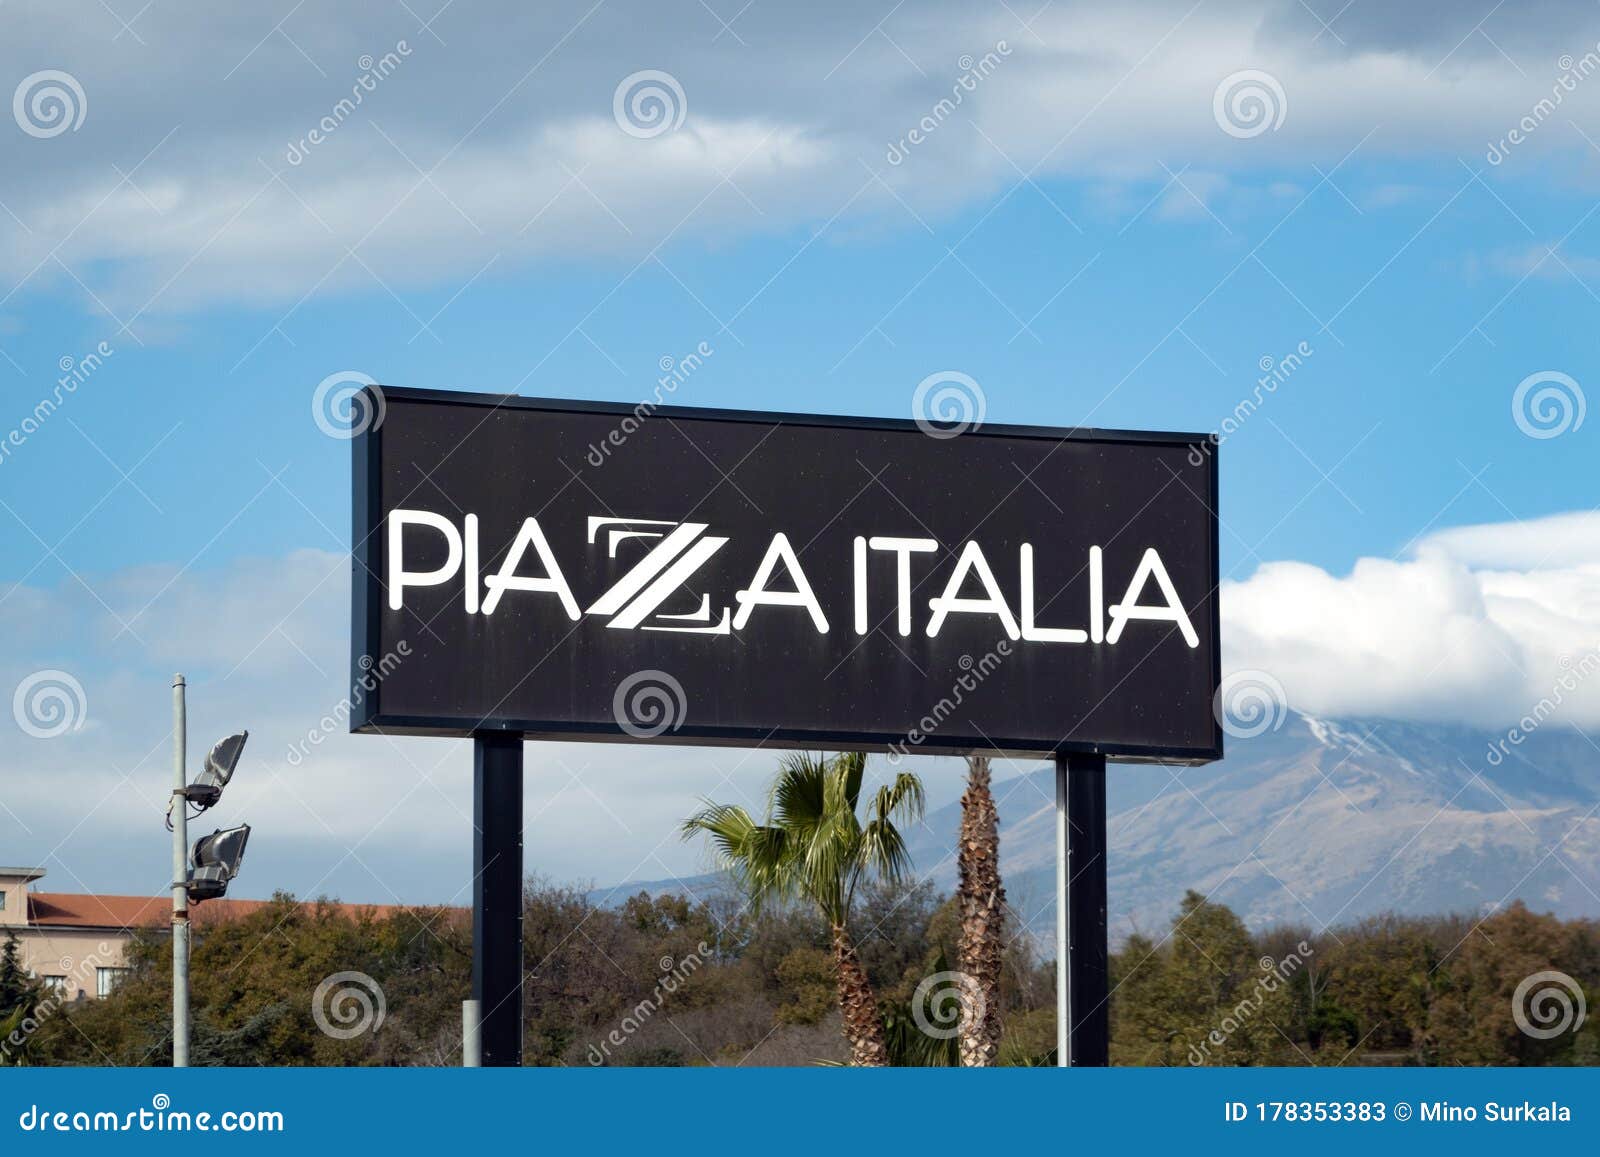 The Banner of the Piazza Italia Fashion Company Which Sells Clothing for  Men, Women, and Kids Editorial Stock Photo - Image of exterior, kids:  178353383